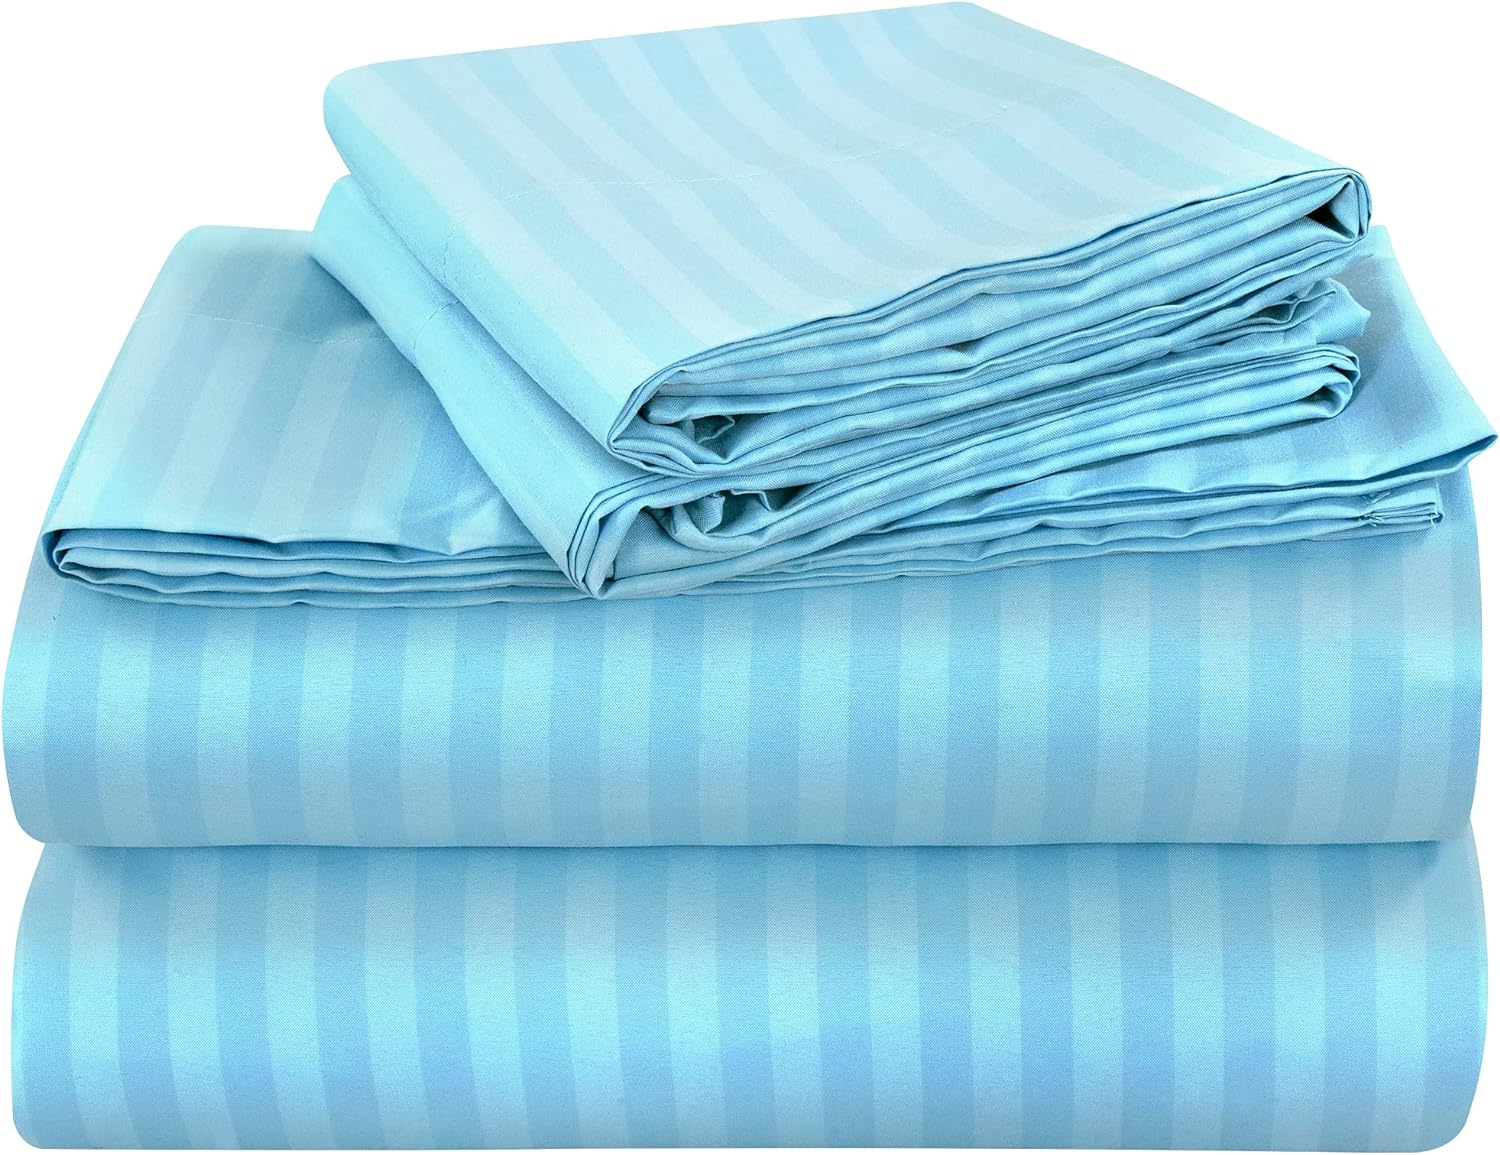 ROYALE LINENS Striped Bed Sheet Set - Microfiber 1800 Bedding - 1 Fitted Sheet, 1 Flat Sheet, 2 Pillow Cases - Wrinkle & Fade Resistant - 4 Piece Damask Stripe Queen Bed Sheet Set (Queen, Lake Blue)